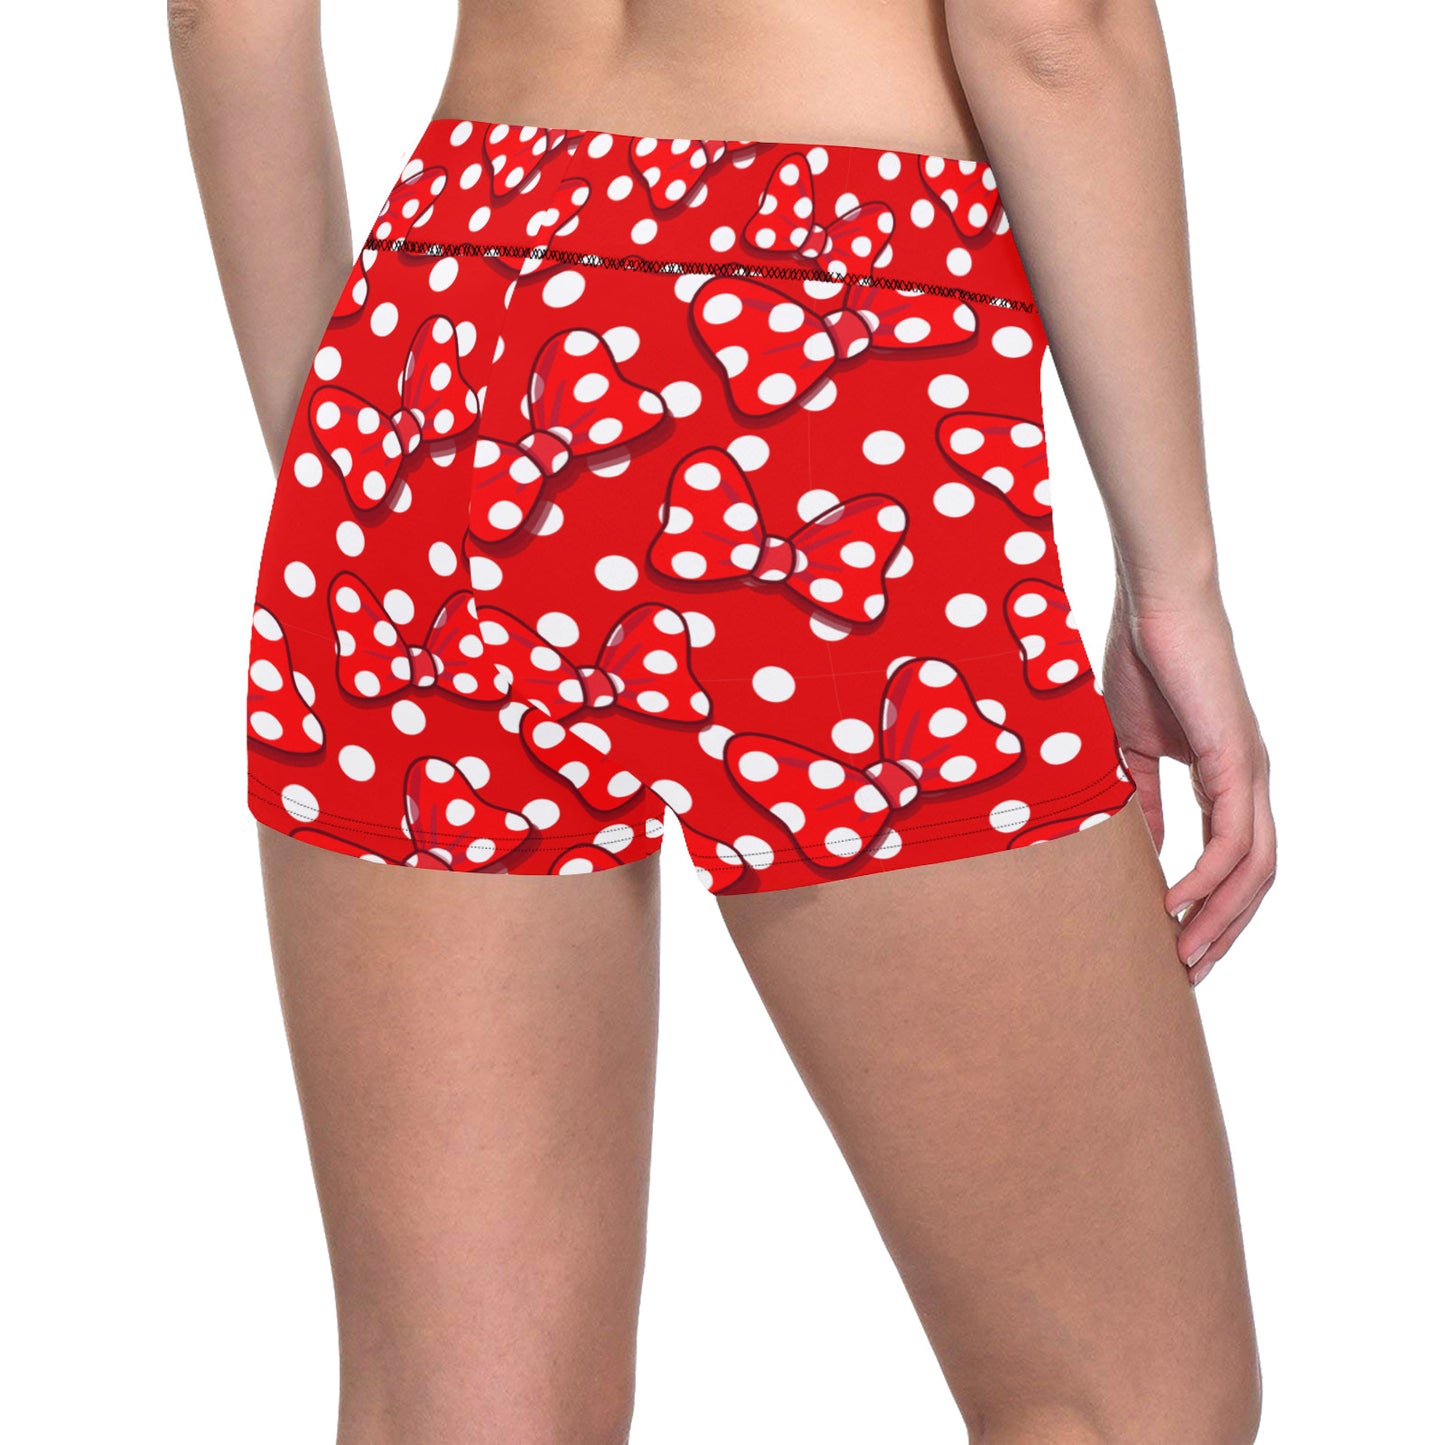 Polka Dots With Red Bows Women's Short Leggings